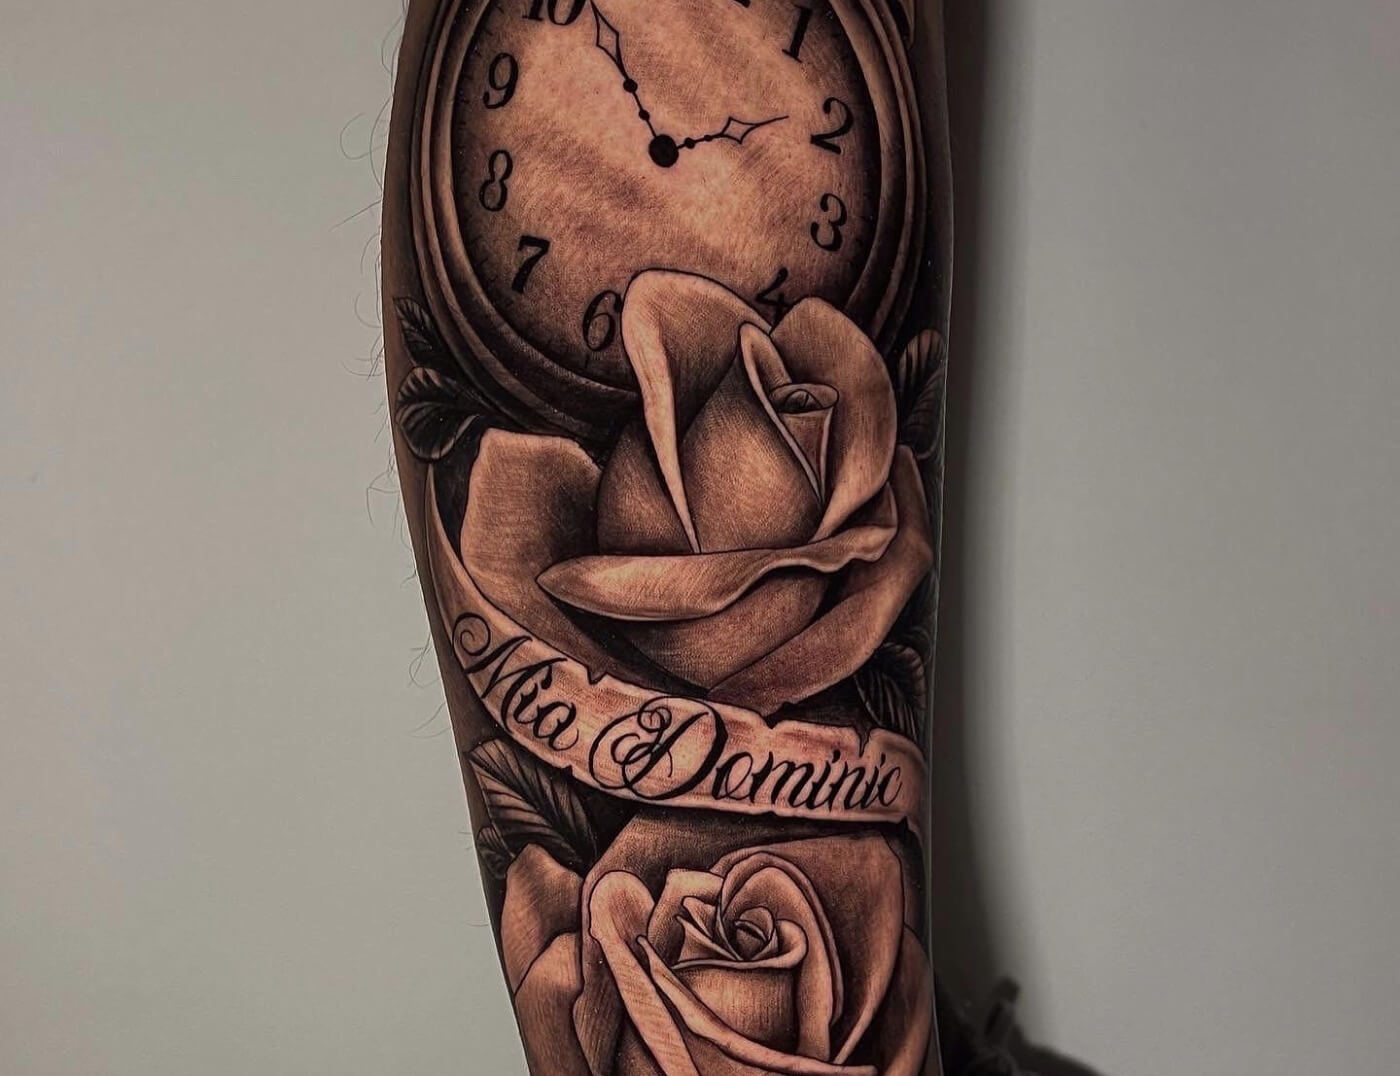 'Mia Domino' With Birth Date Black & Grey Lettering Script Tattoo By Rene Cristobal, A Guest Artist At Iron Palm Tattoos In Atlanta. Rene comes to Atlanta July 3rd -16th and is available for booking. We're open late night til 2AM. Call 404-973-7828 or stop by for a free consultation. Walk ins are welcome.